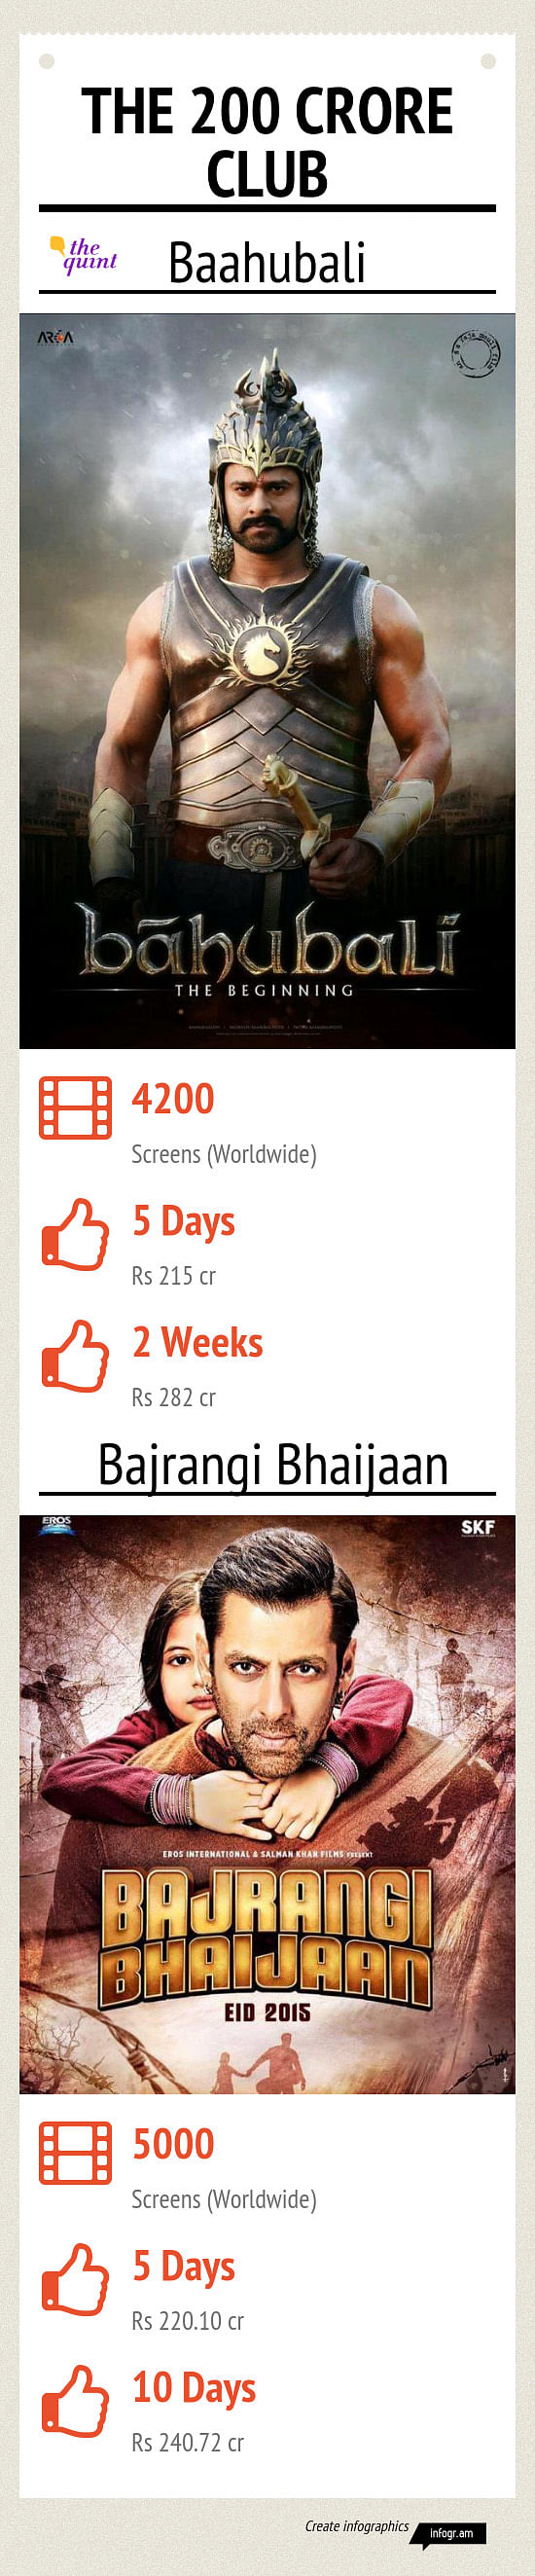 The two blockbusters Bajrangi Bhaijaan and Baahubali have crossed 200 cr net and the numbers are unstoppable 